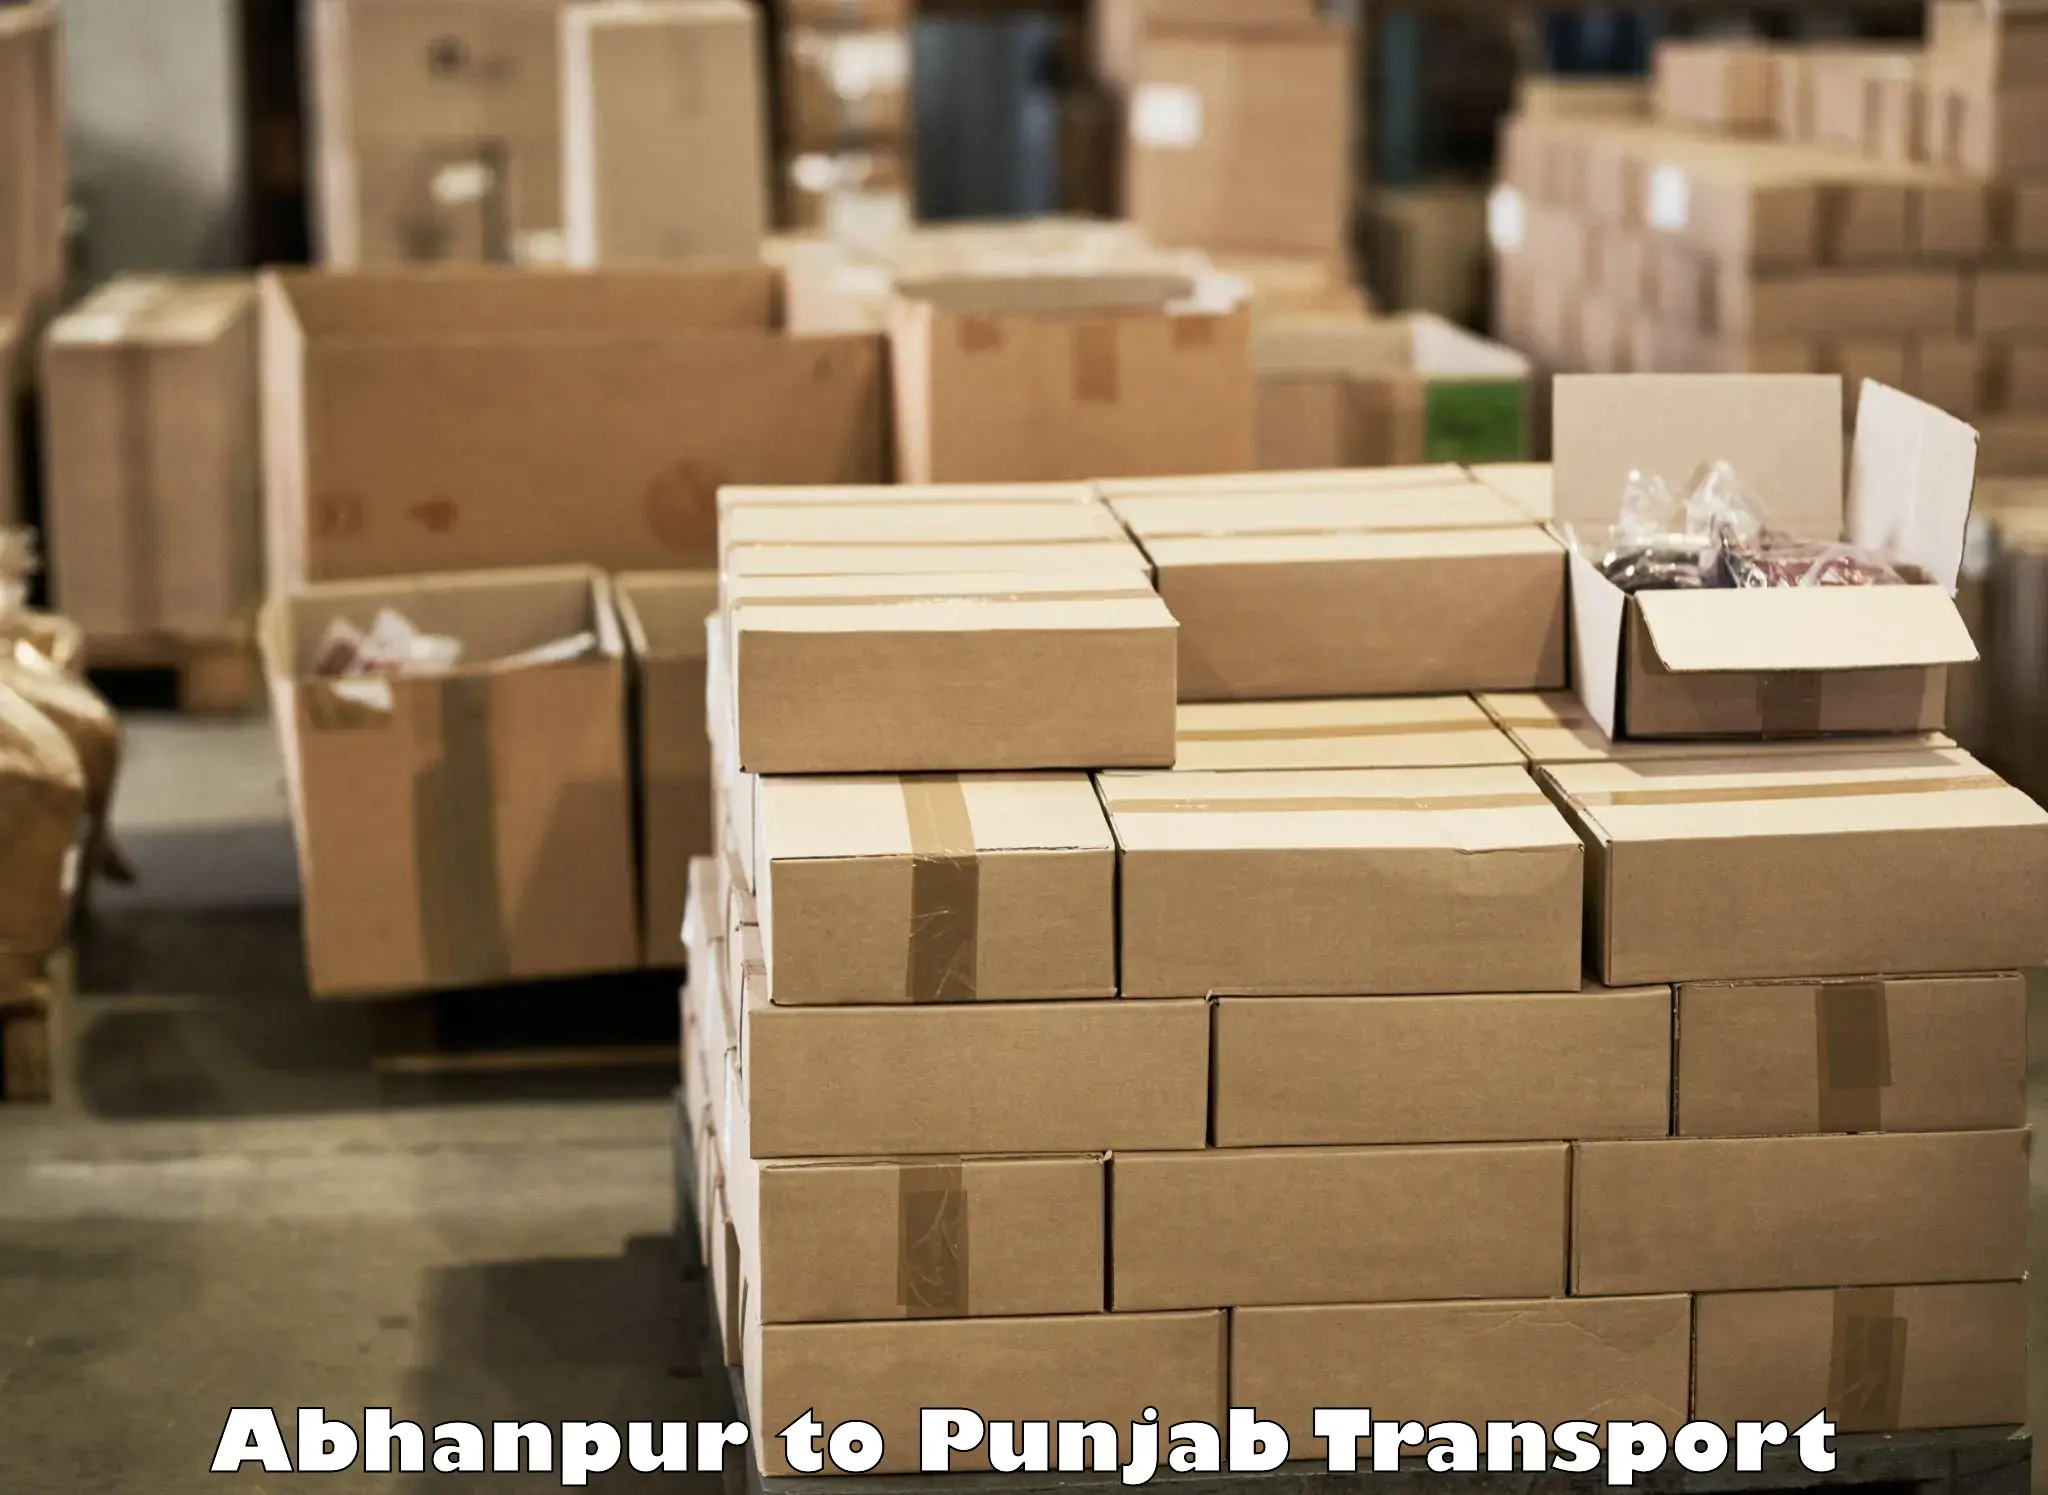 Online transport service Abhanpur to Mohali